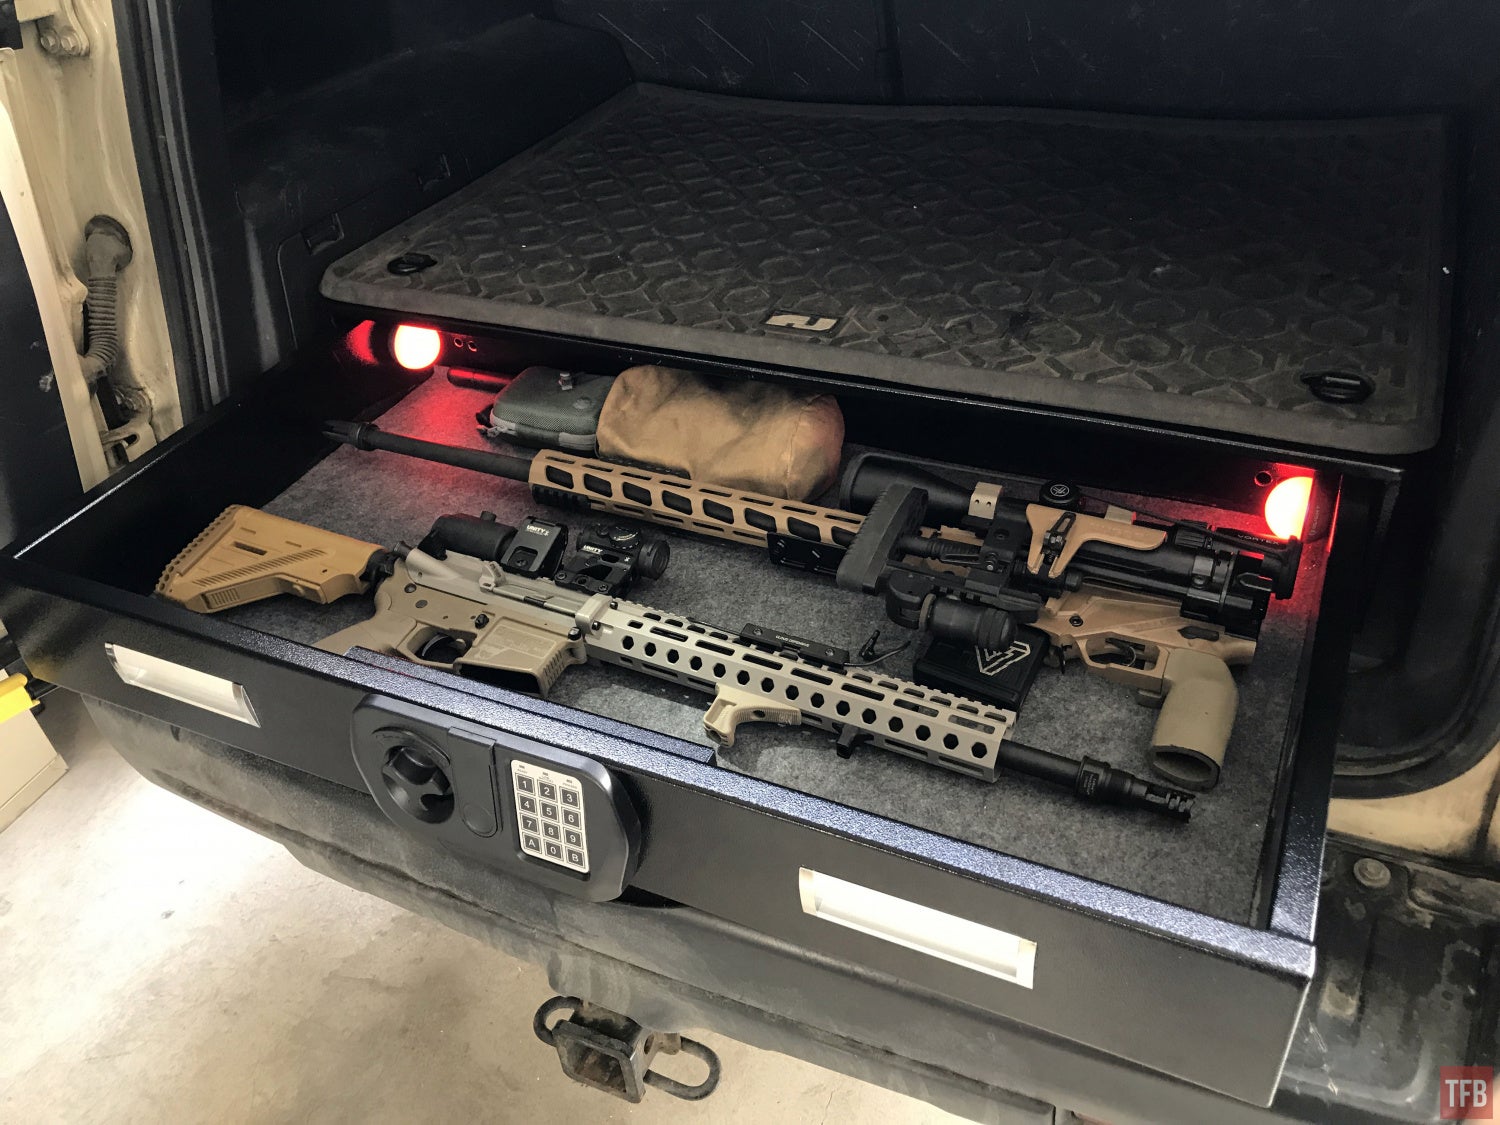 TFB Review: SnapSafe Under Bed Safe As An SUV/CAR Safe -The Firearm Blog